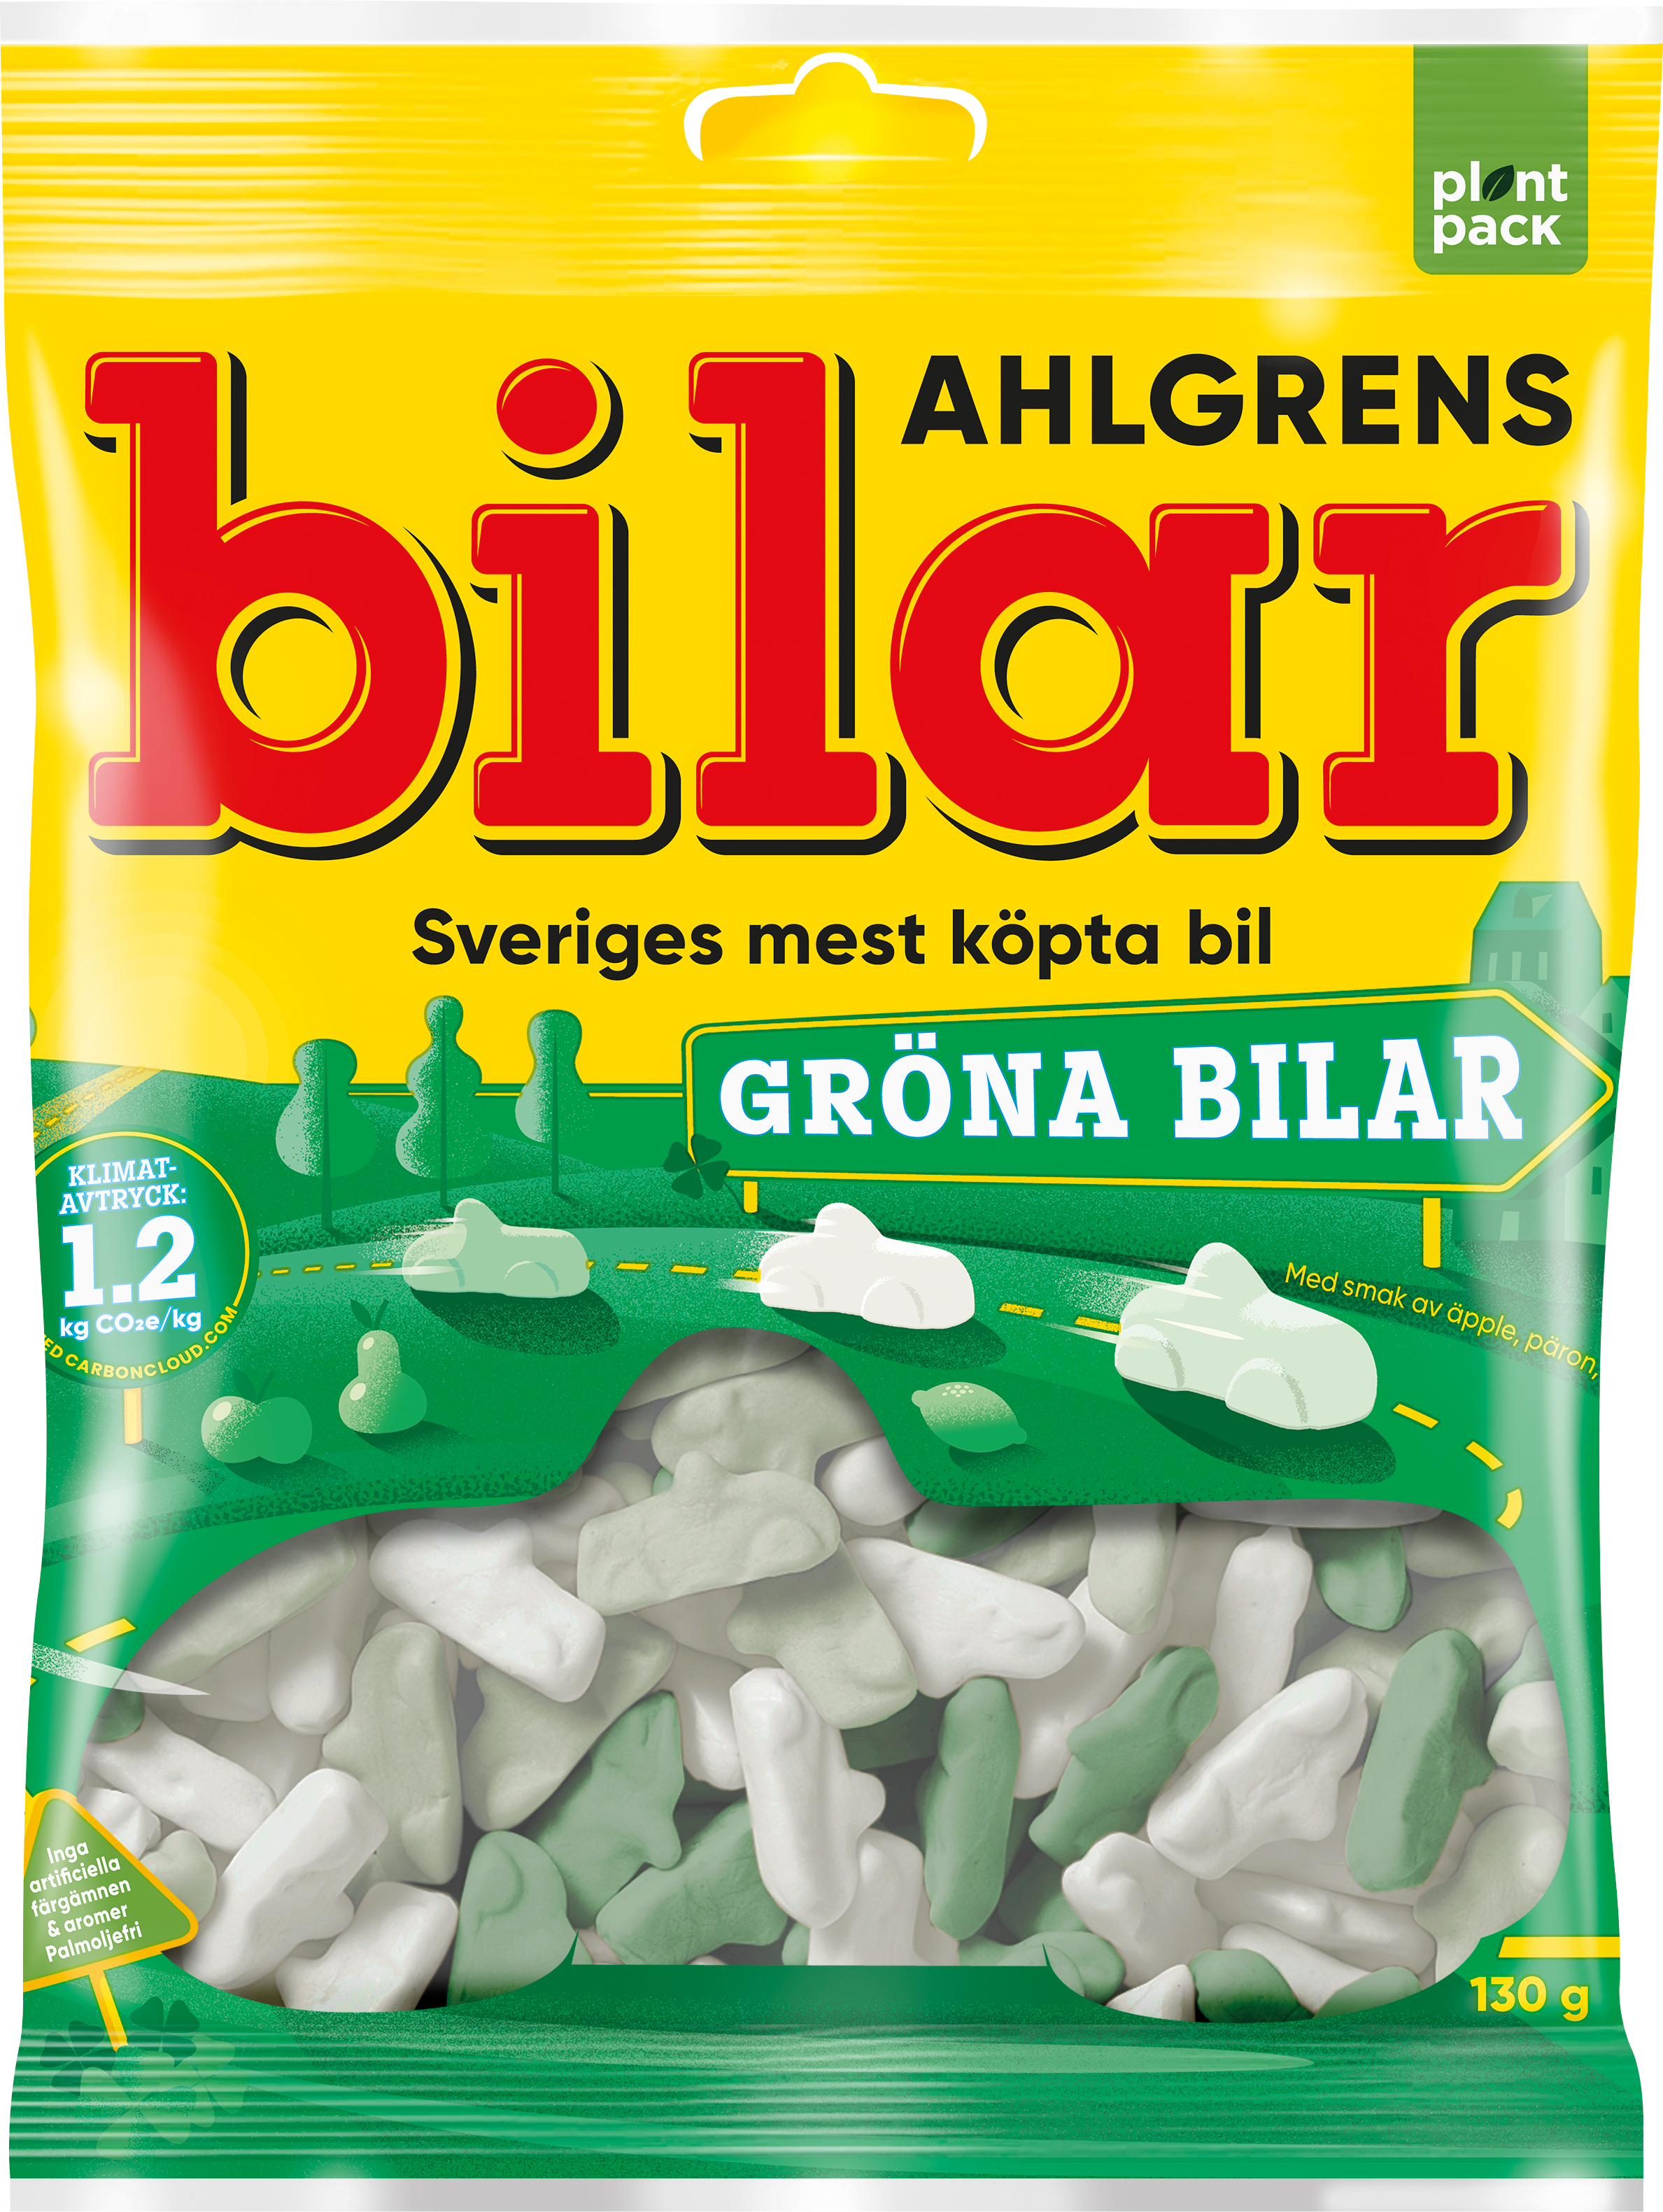 Ahlgrens Bilar Coches verdes by Swedish Candy Store